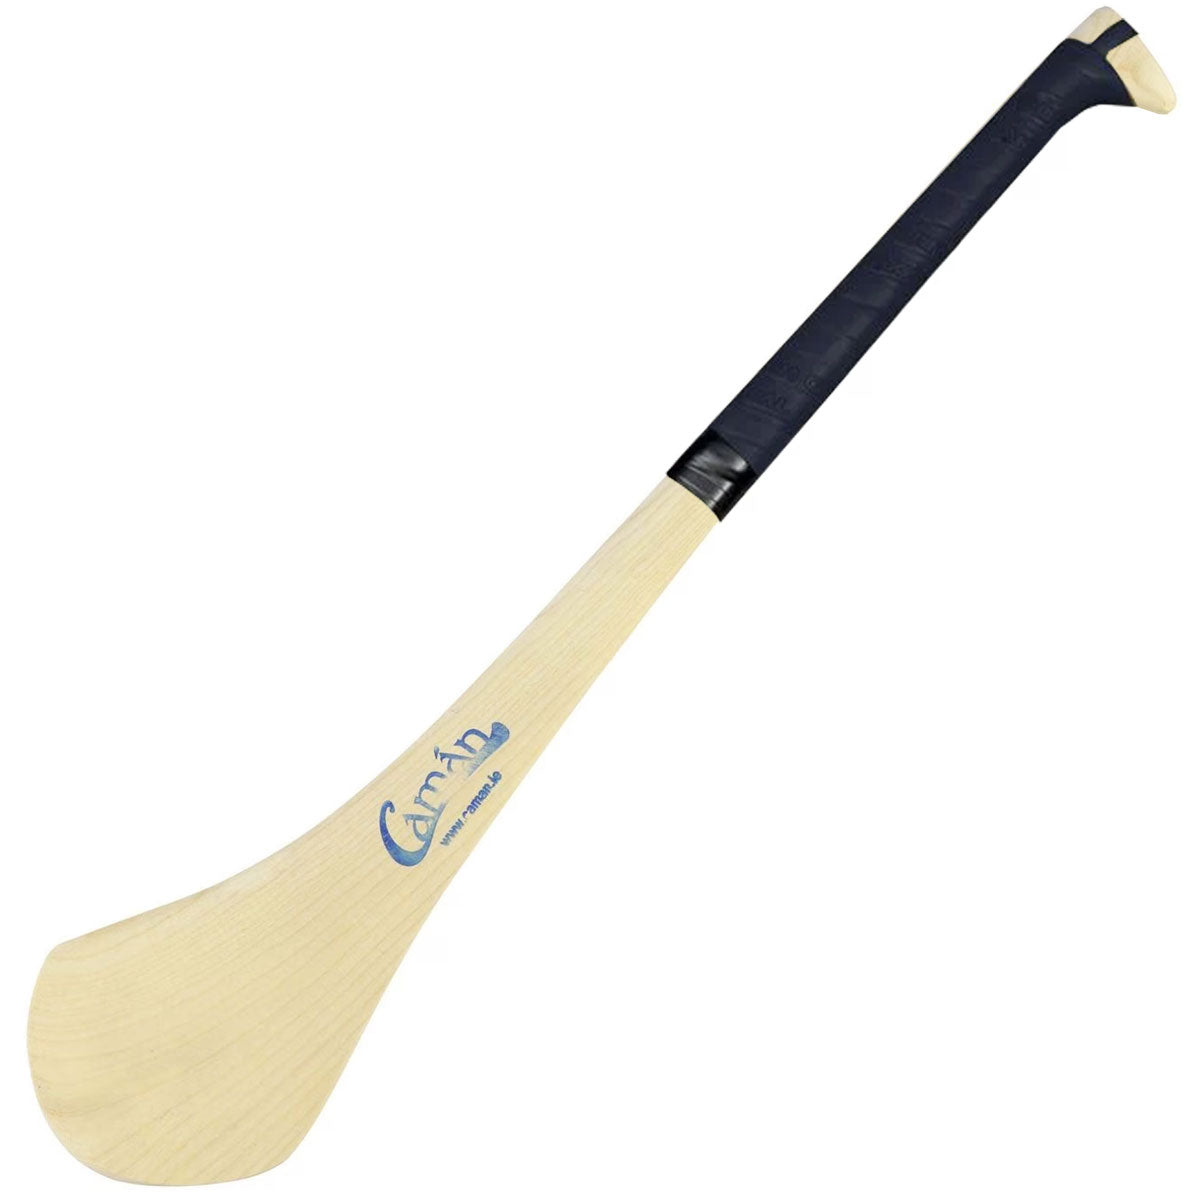 Caman Hurling Stick size 35 (Inches)